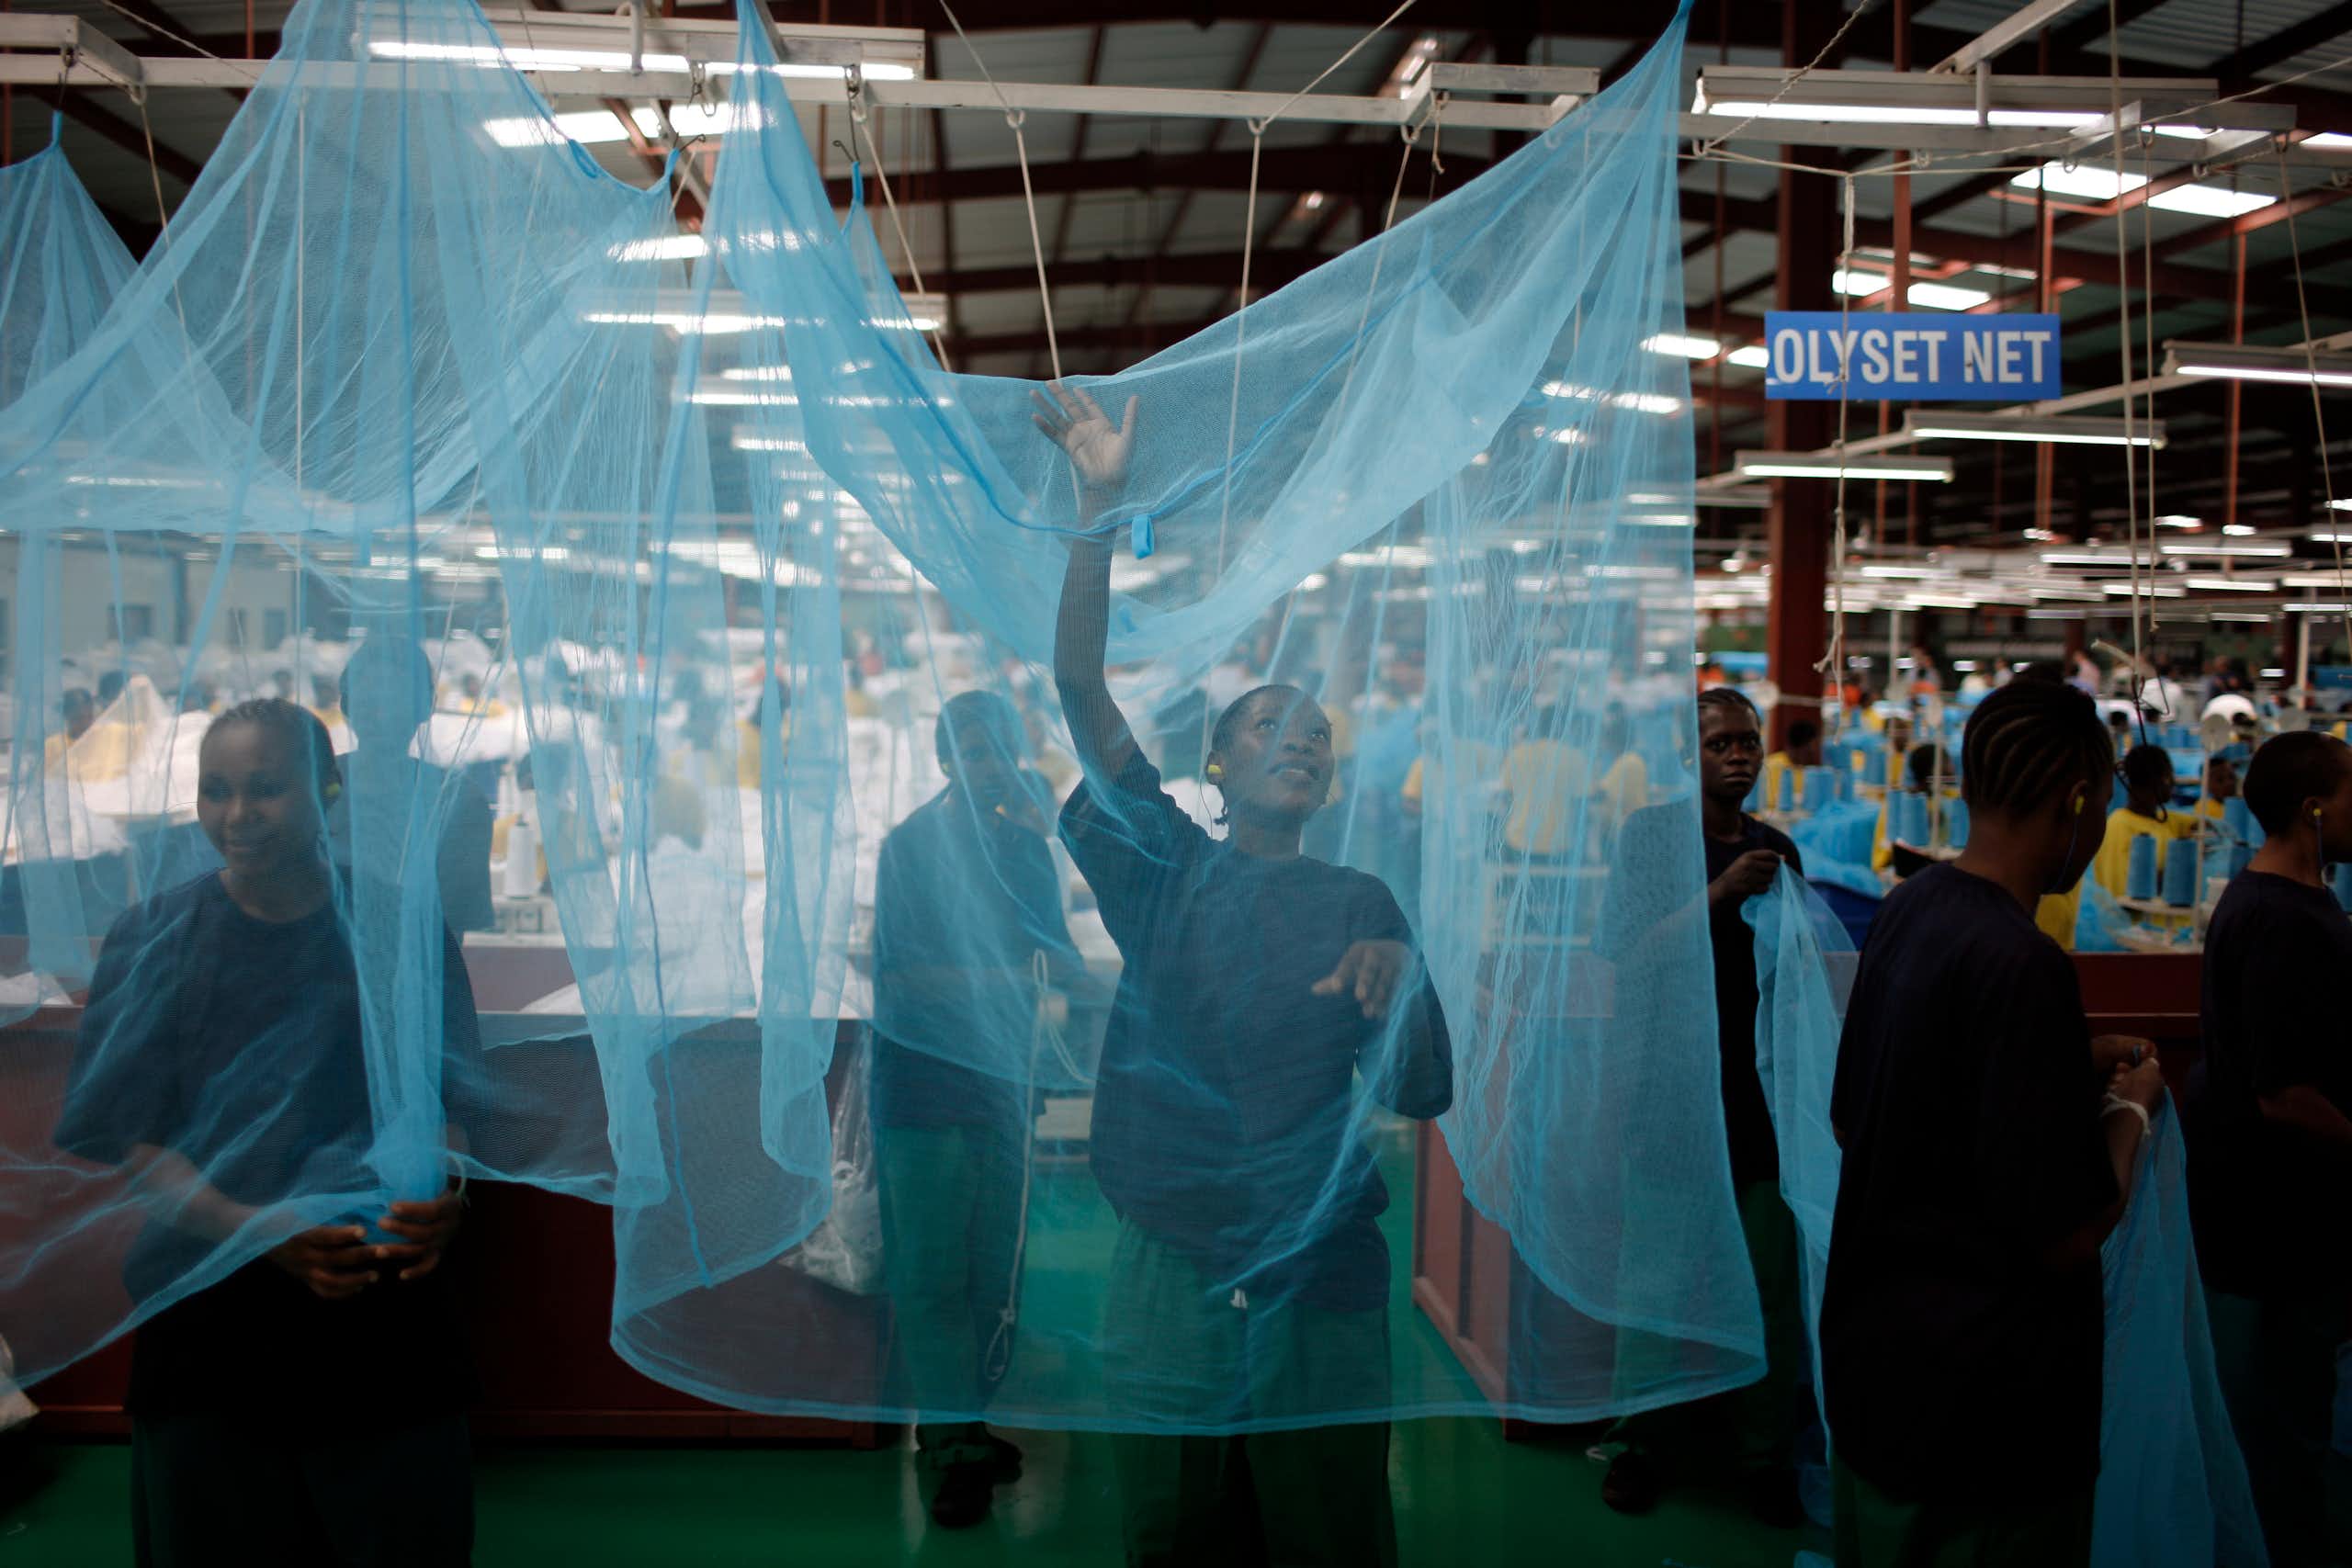 A woman stands inside a mosquito net in a factory setting